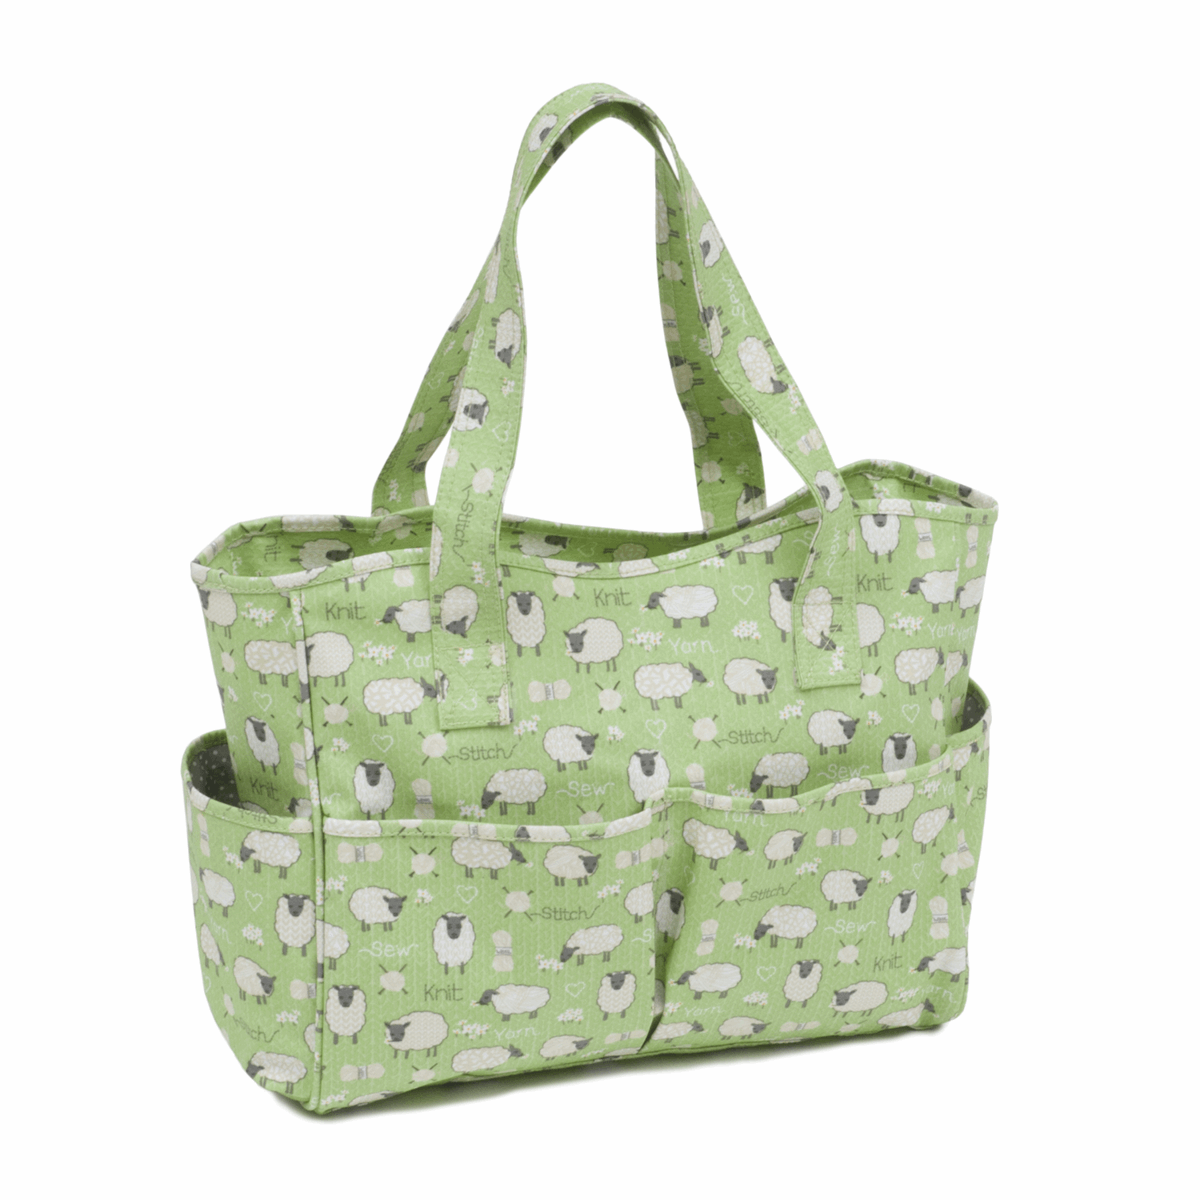 Deluxe Craft Bag - Sheep